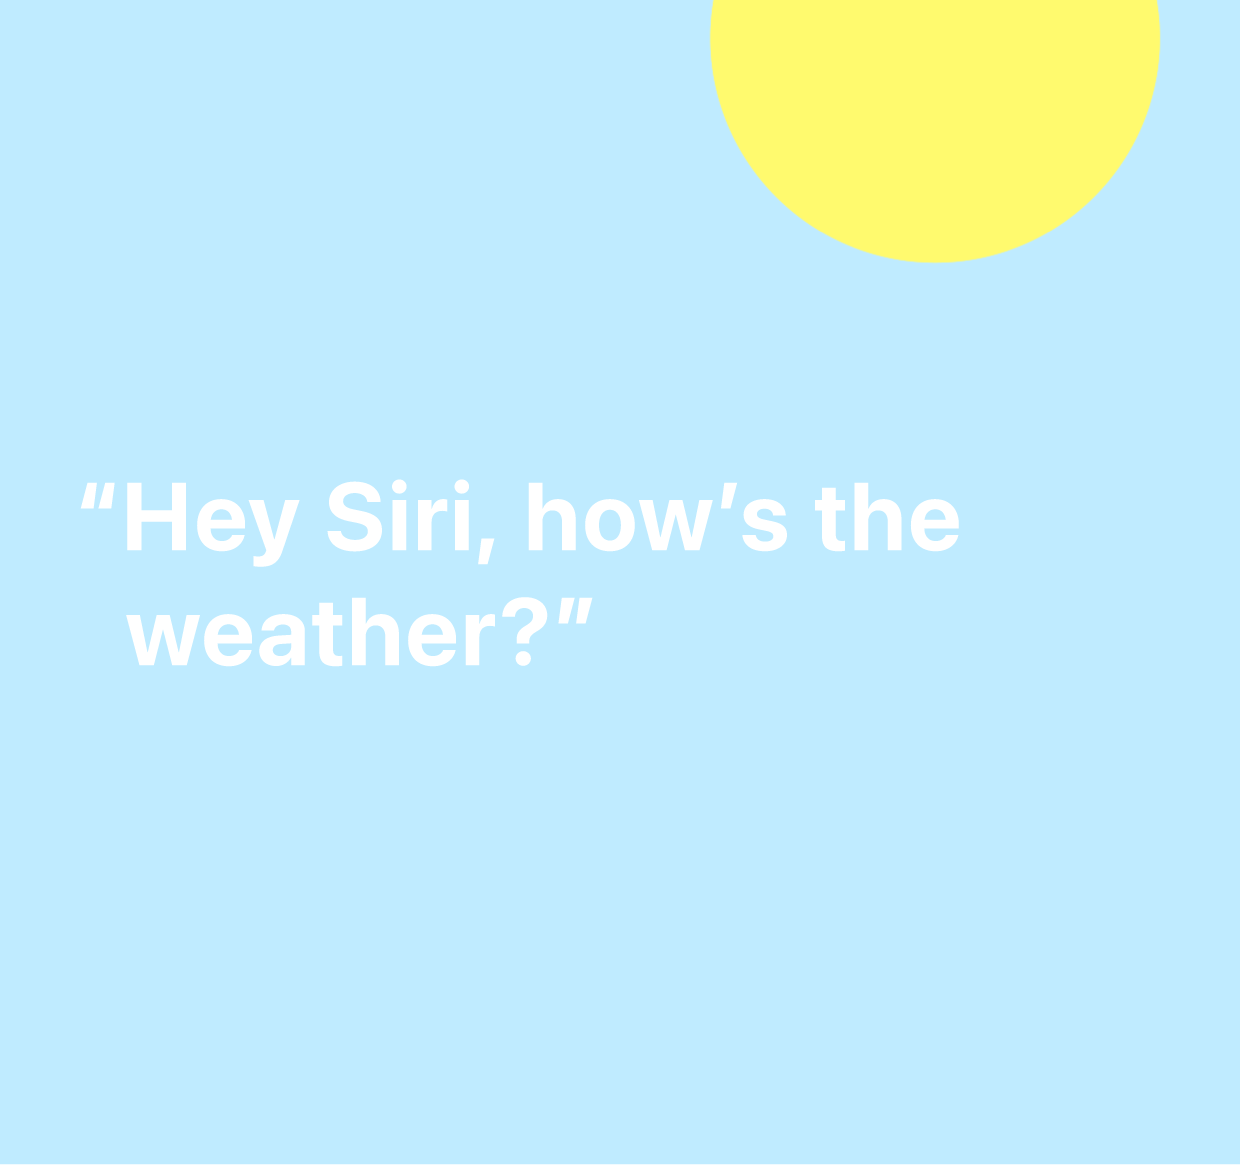 An illustration of the words “Hey Siri, how’s the weather?”